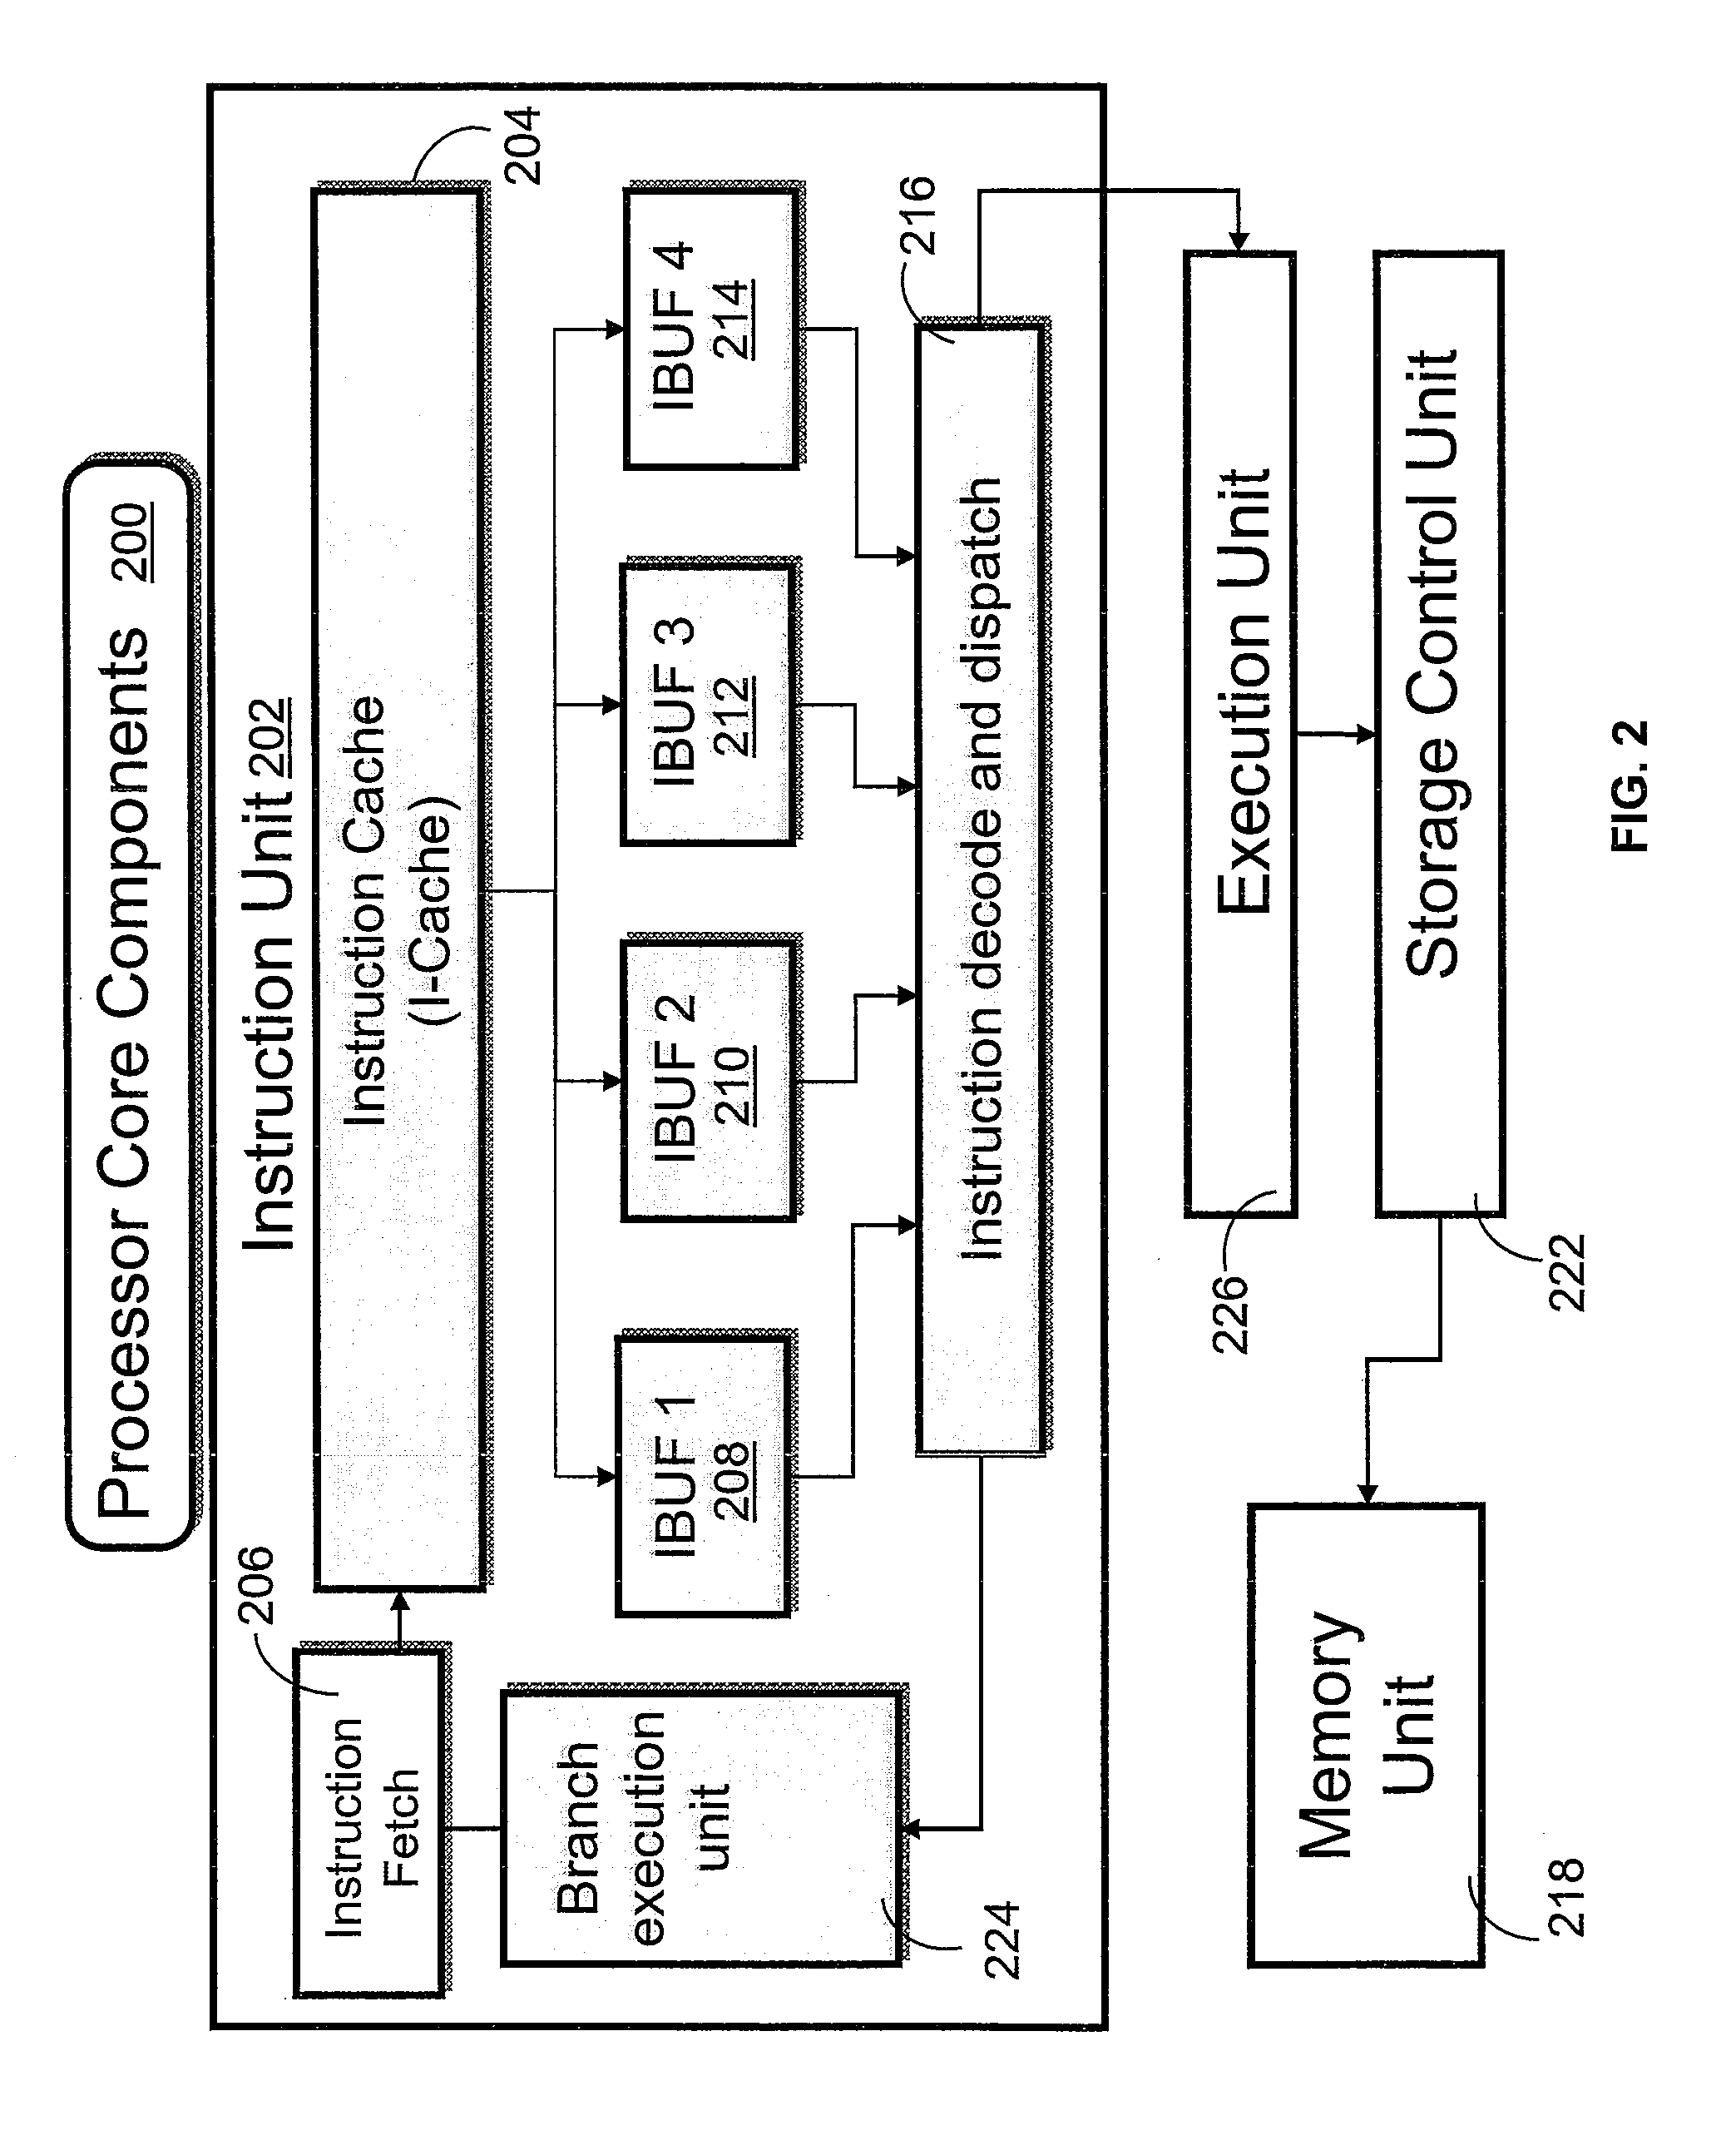 Design structure for improving efficiency of short loop instruction fetch